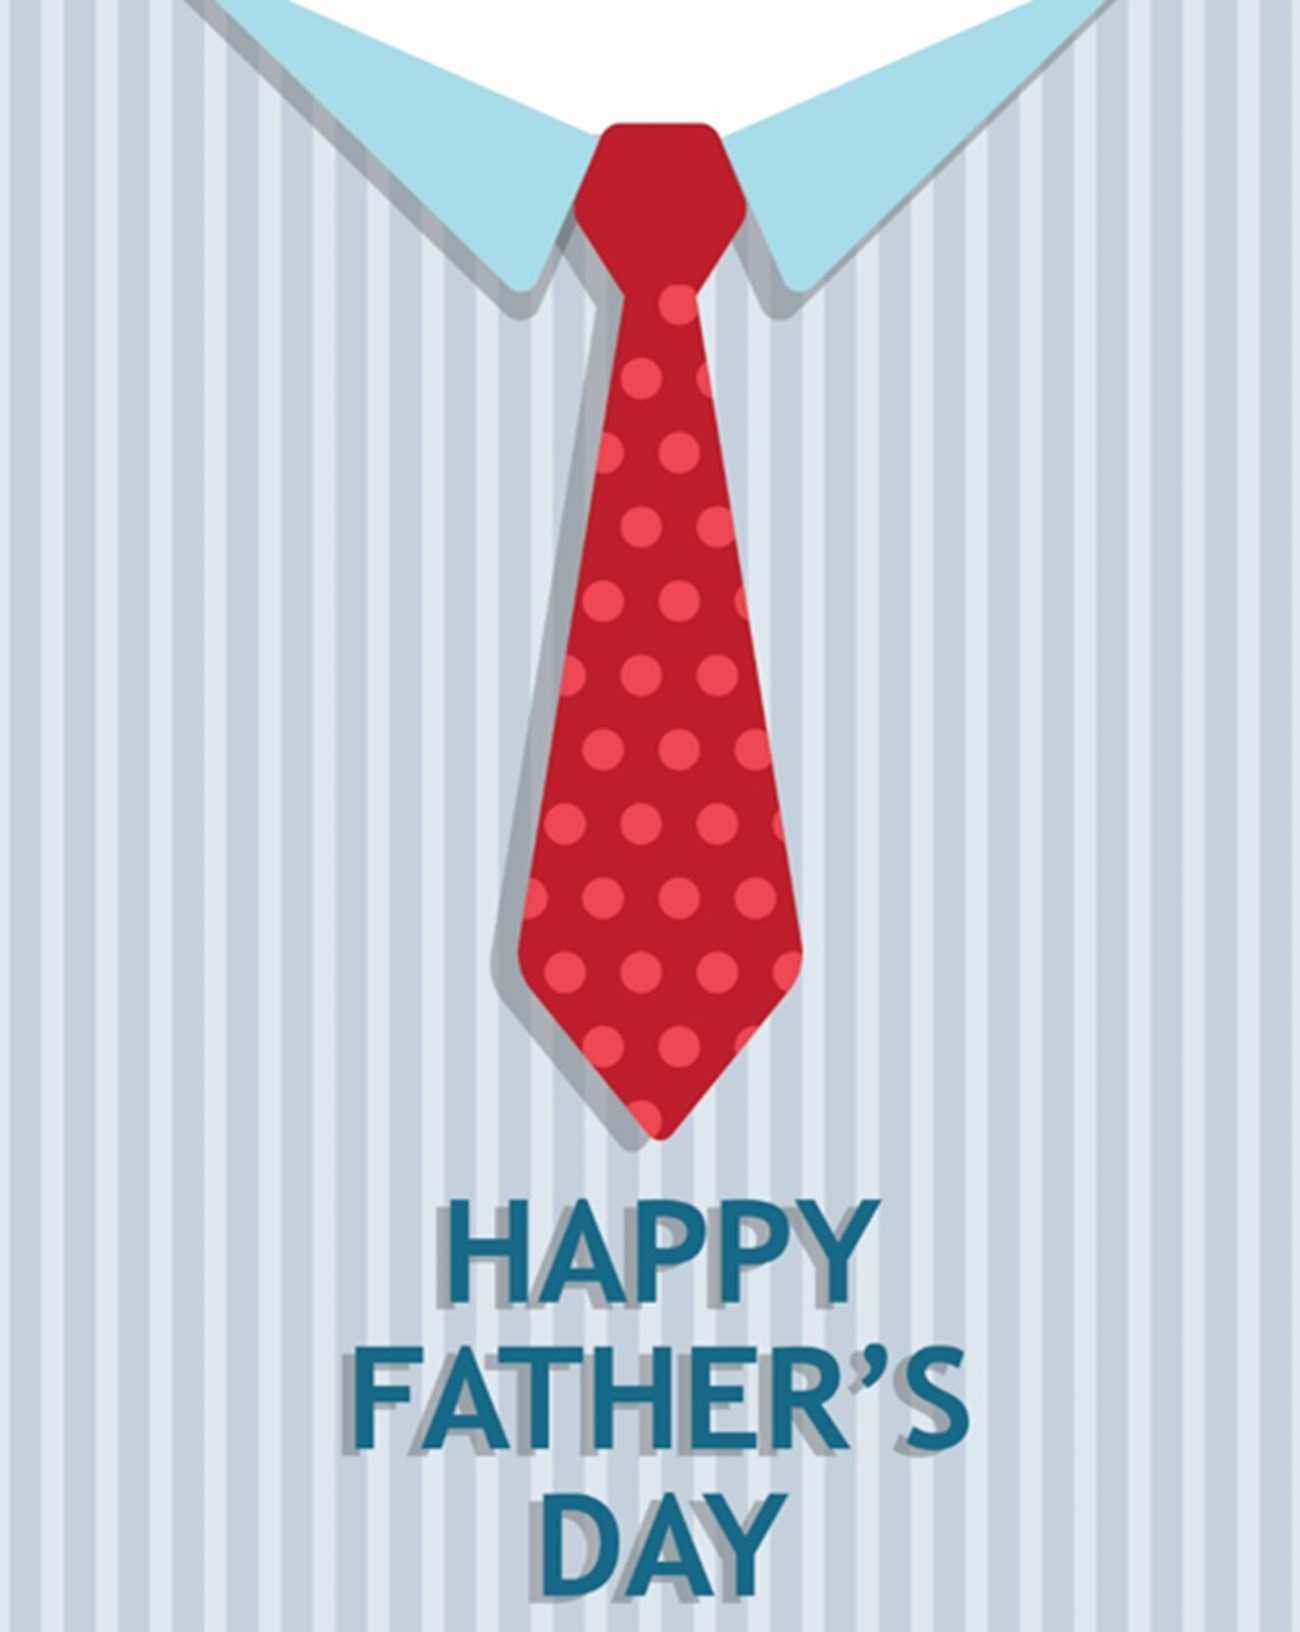 Tie Father's Day Card (Quarter Fold) In Quarter Fold Greeting Card Template